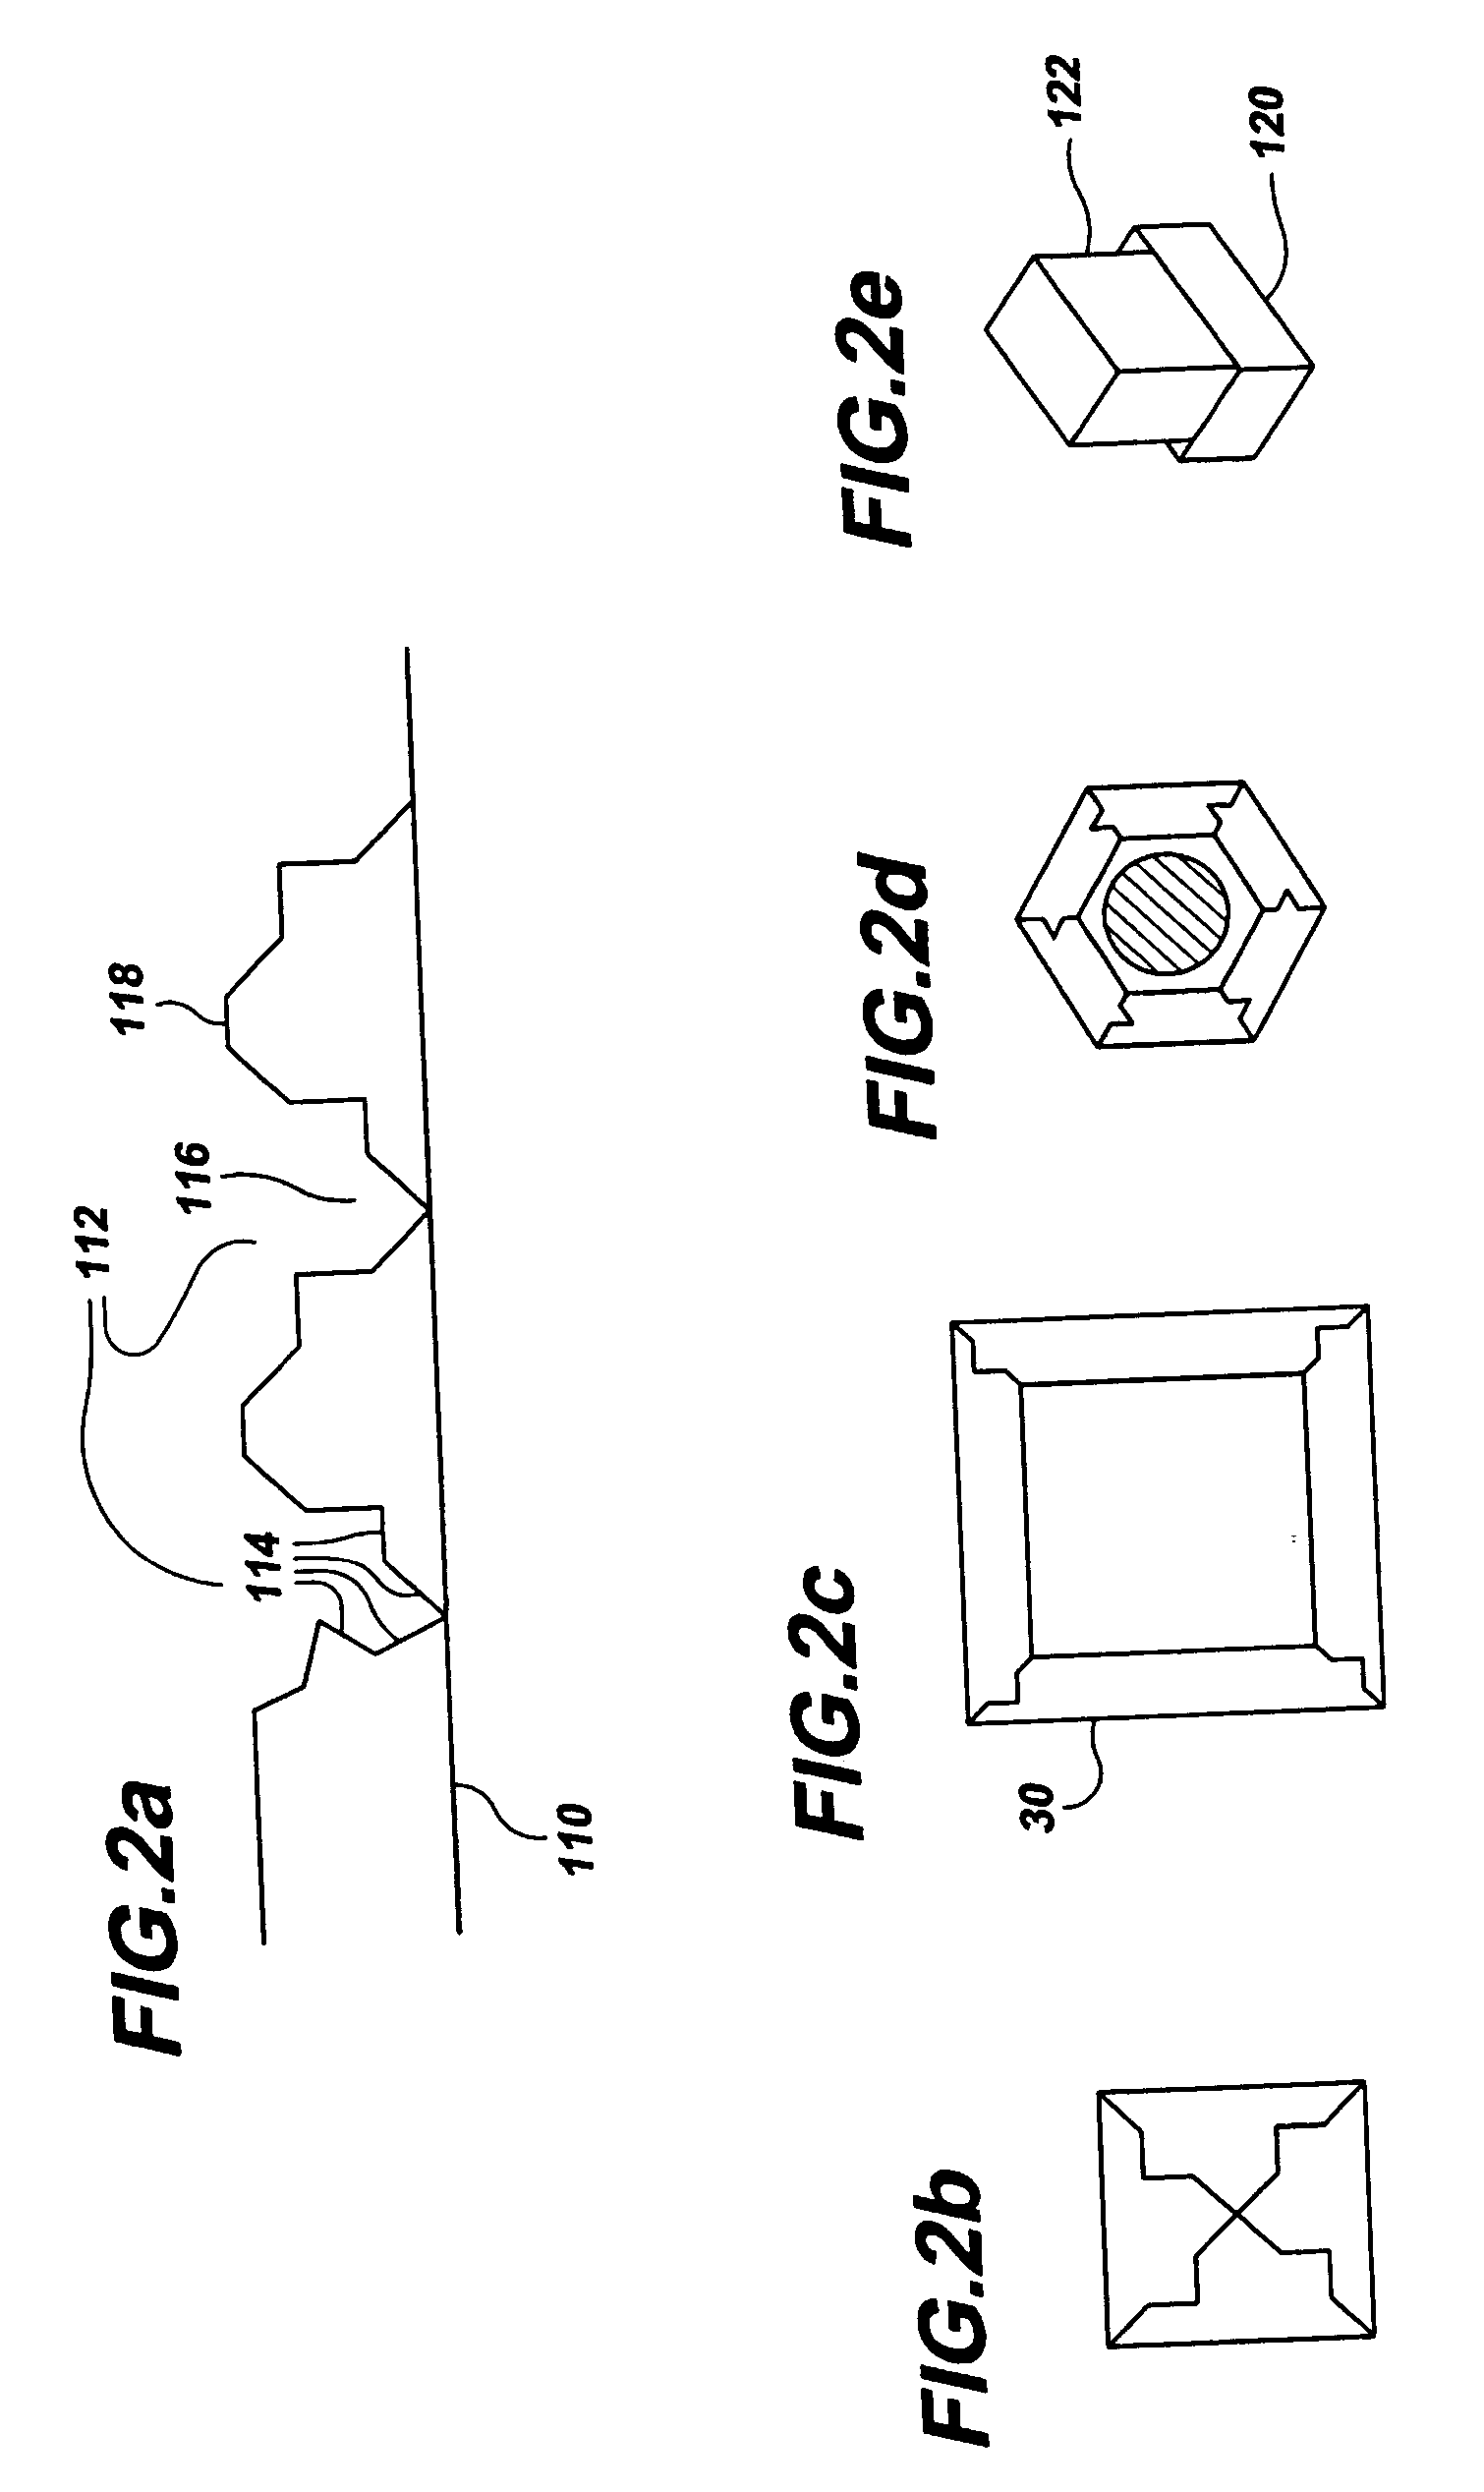 Laminate structural material trim and applications thereof